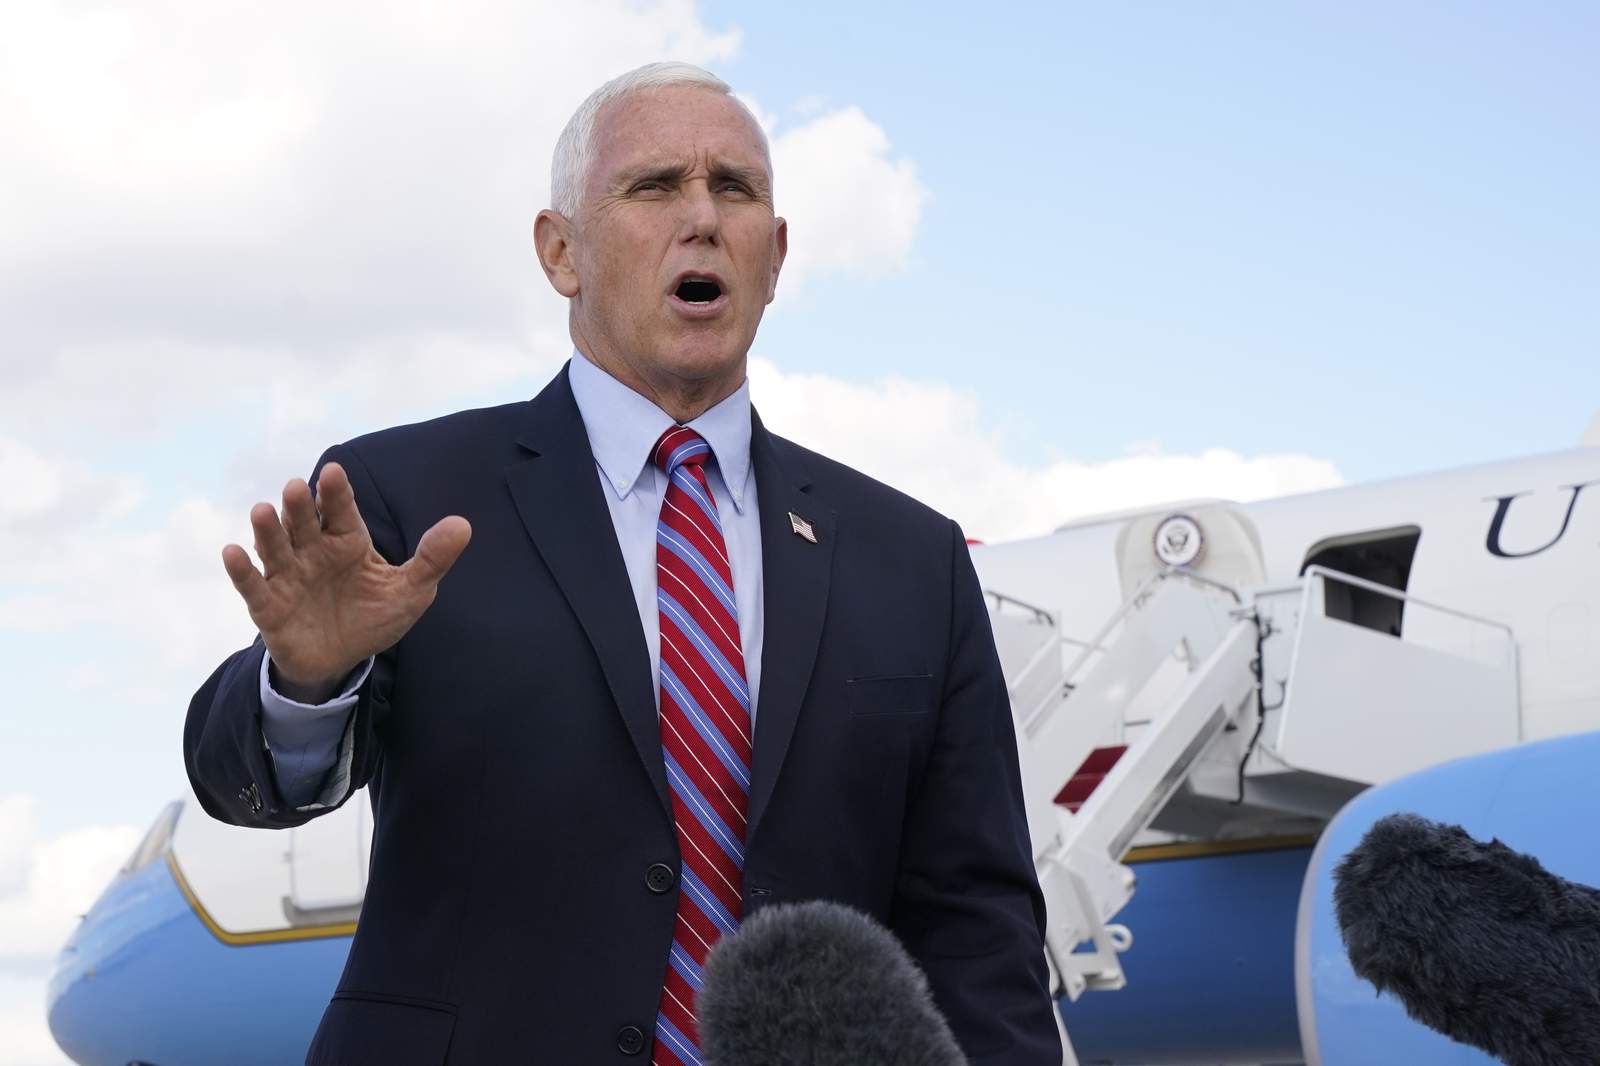 Trump’s defender: Pence’s campaign role grows at key moment